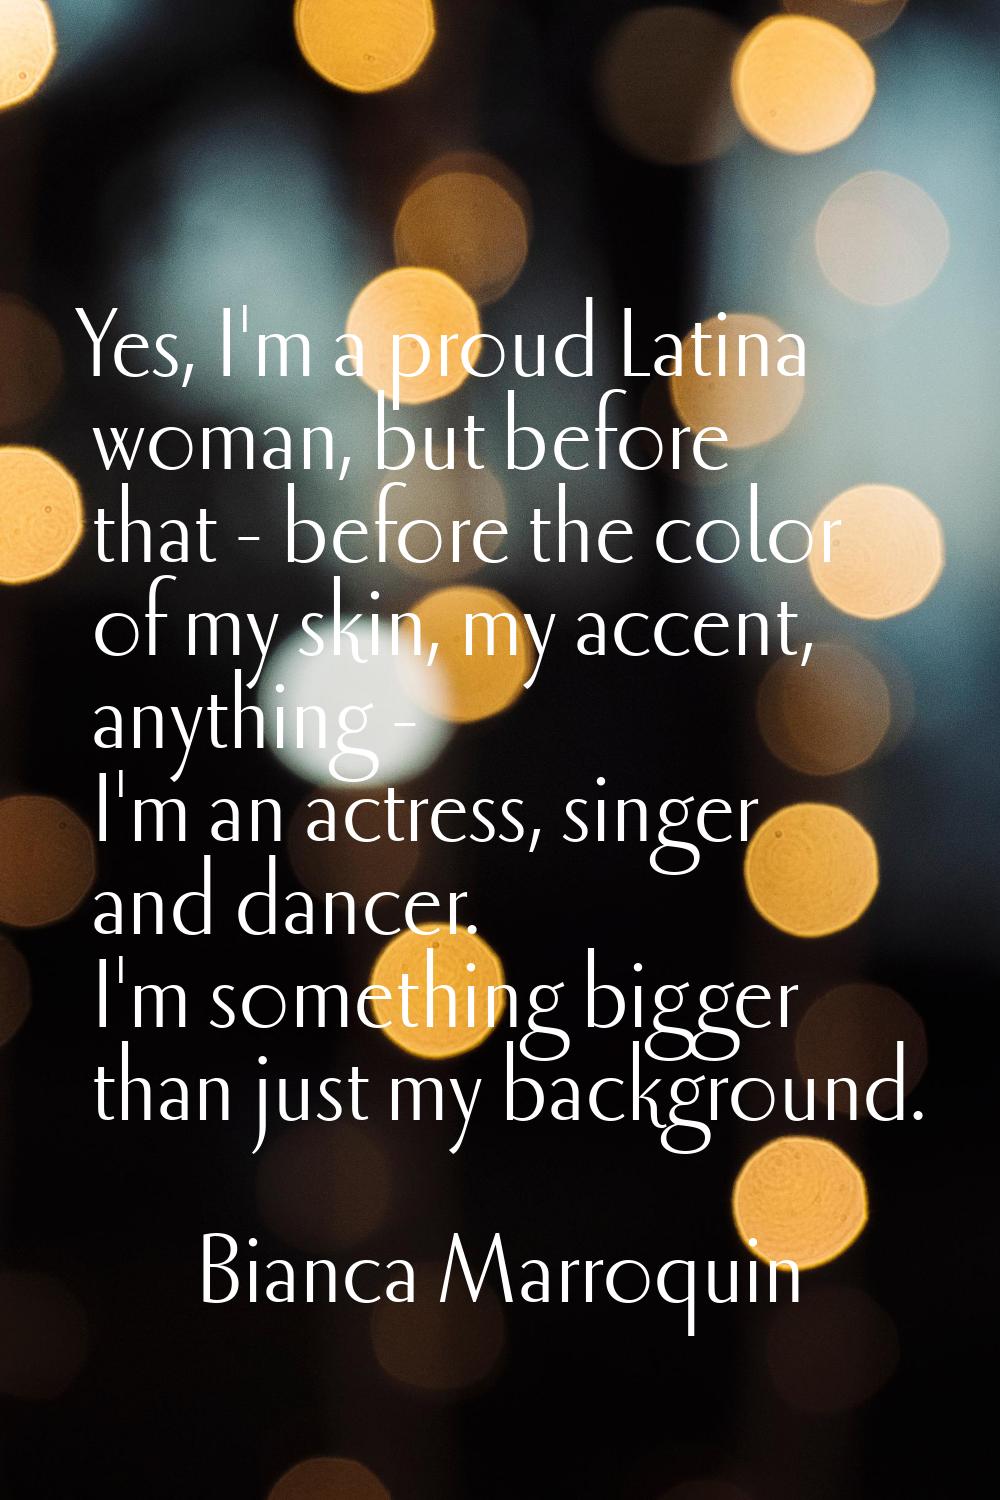 Yes, I'm a proud Latina woman, but before that - before the color of my skin, my accent, anything -